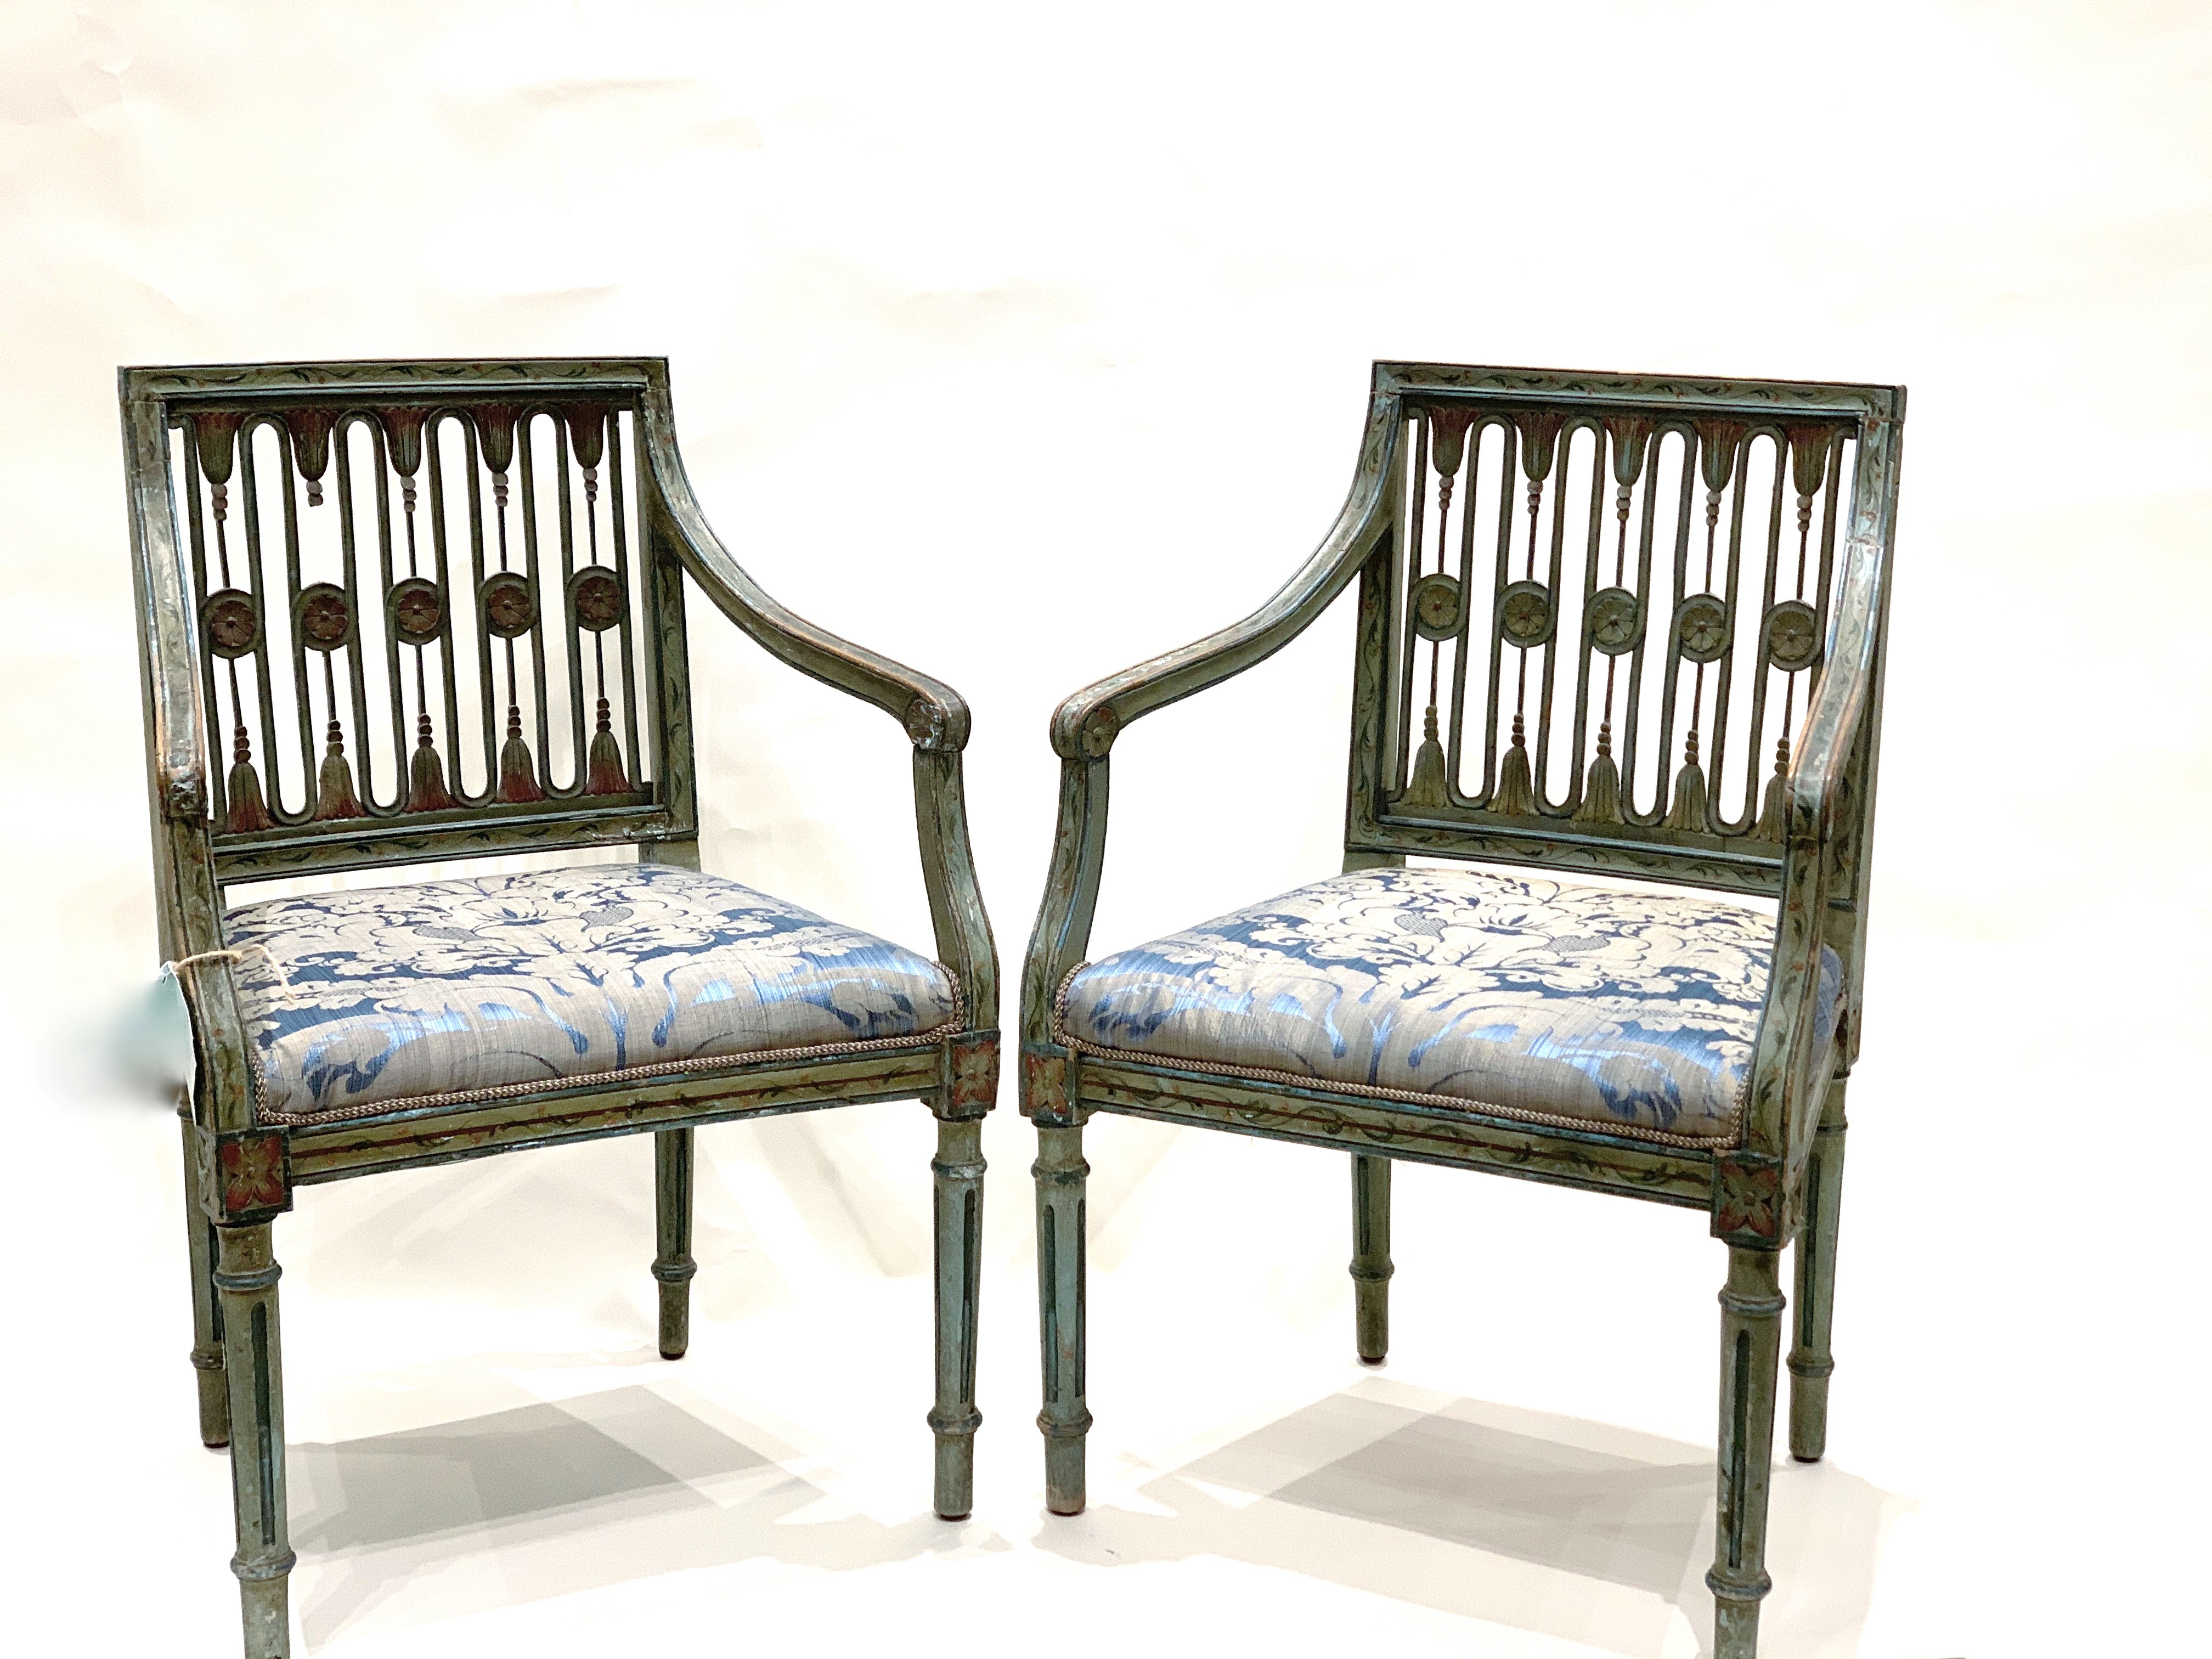 Pair of Antique Hand Painted Italian Chairs